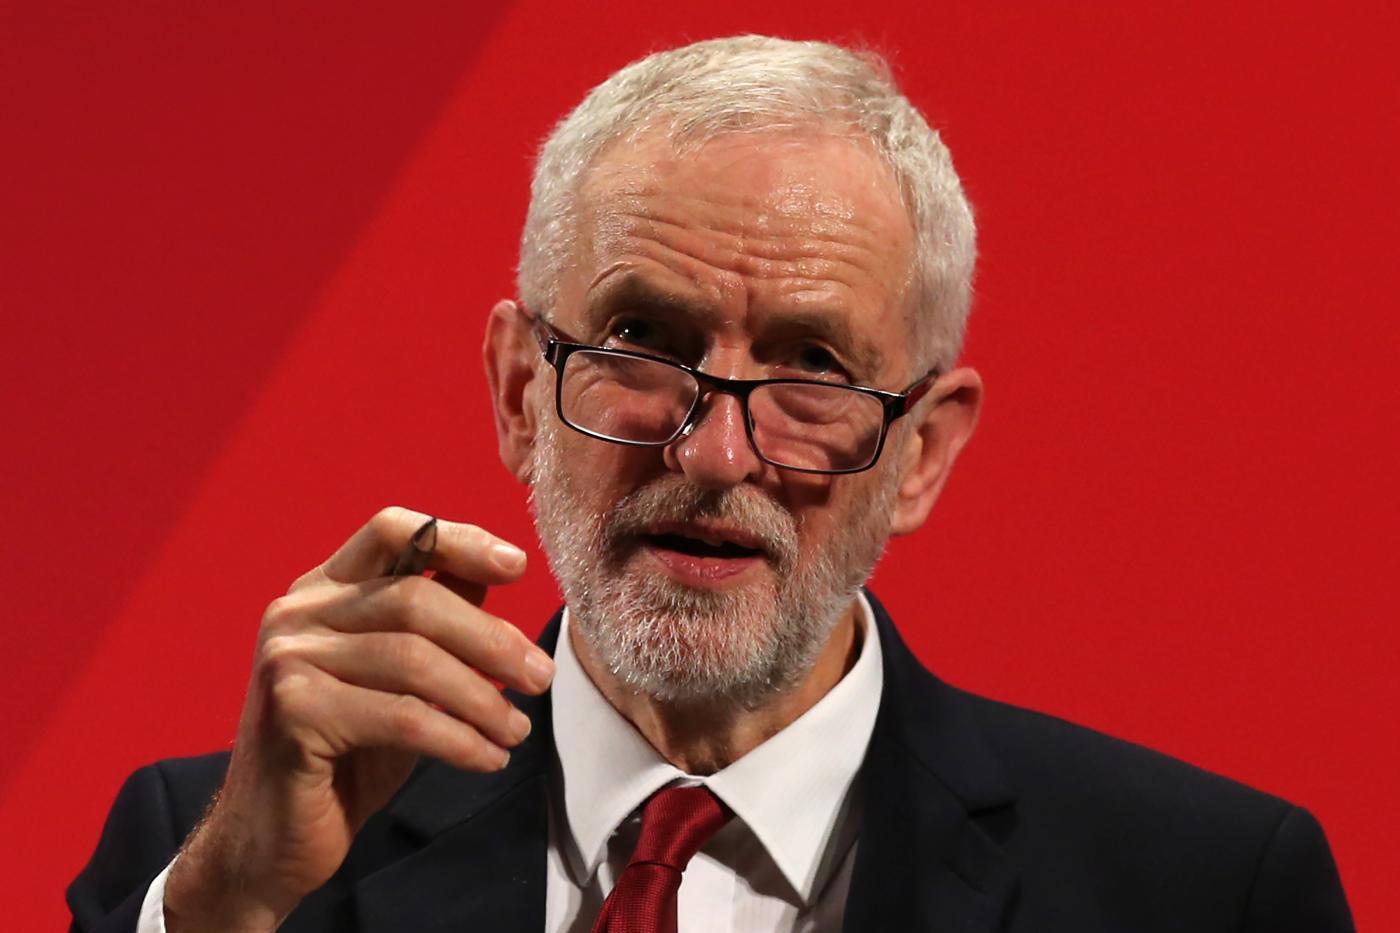 Jeremy Corbyn, former leader of the Labour Party, stepped down after the 2019 general election defeat (AFP)